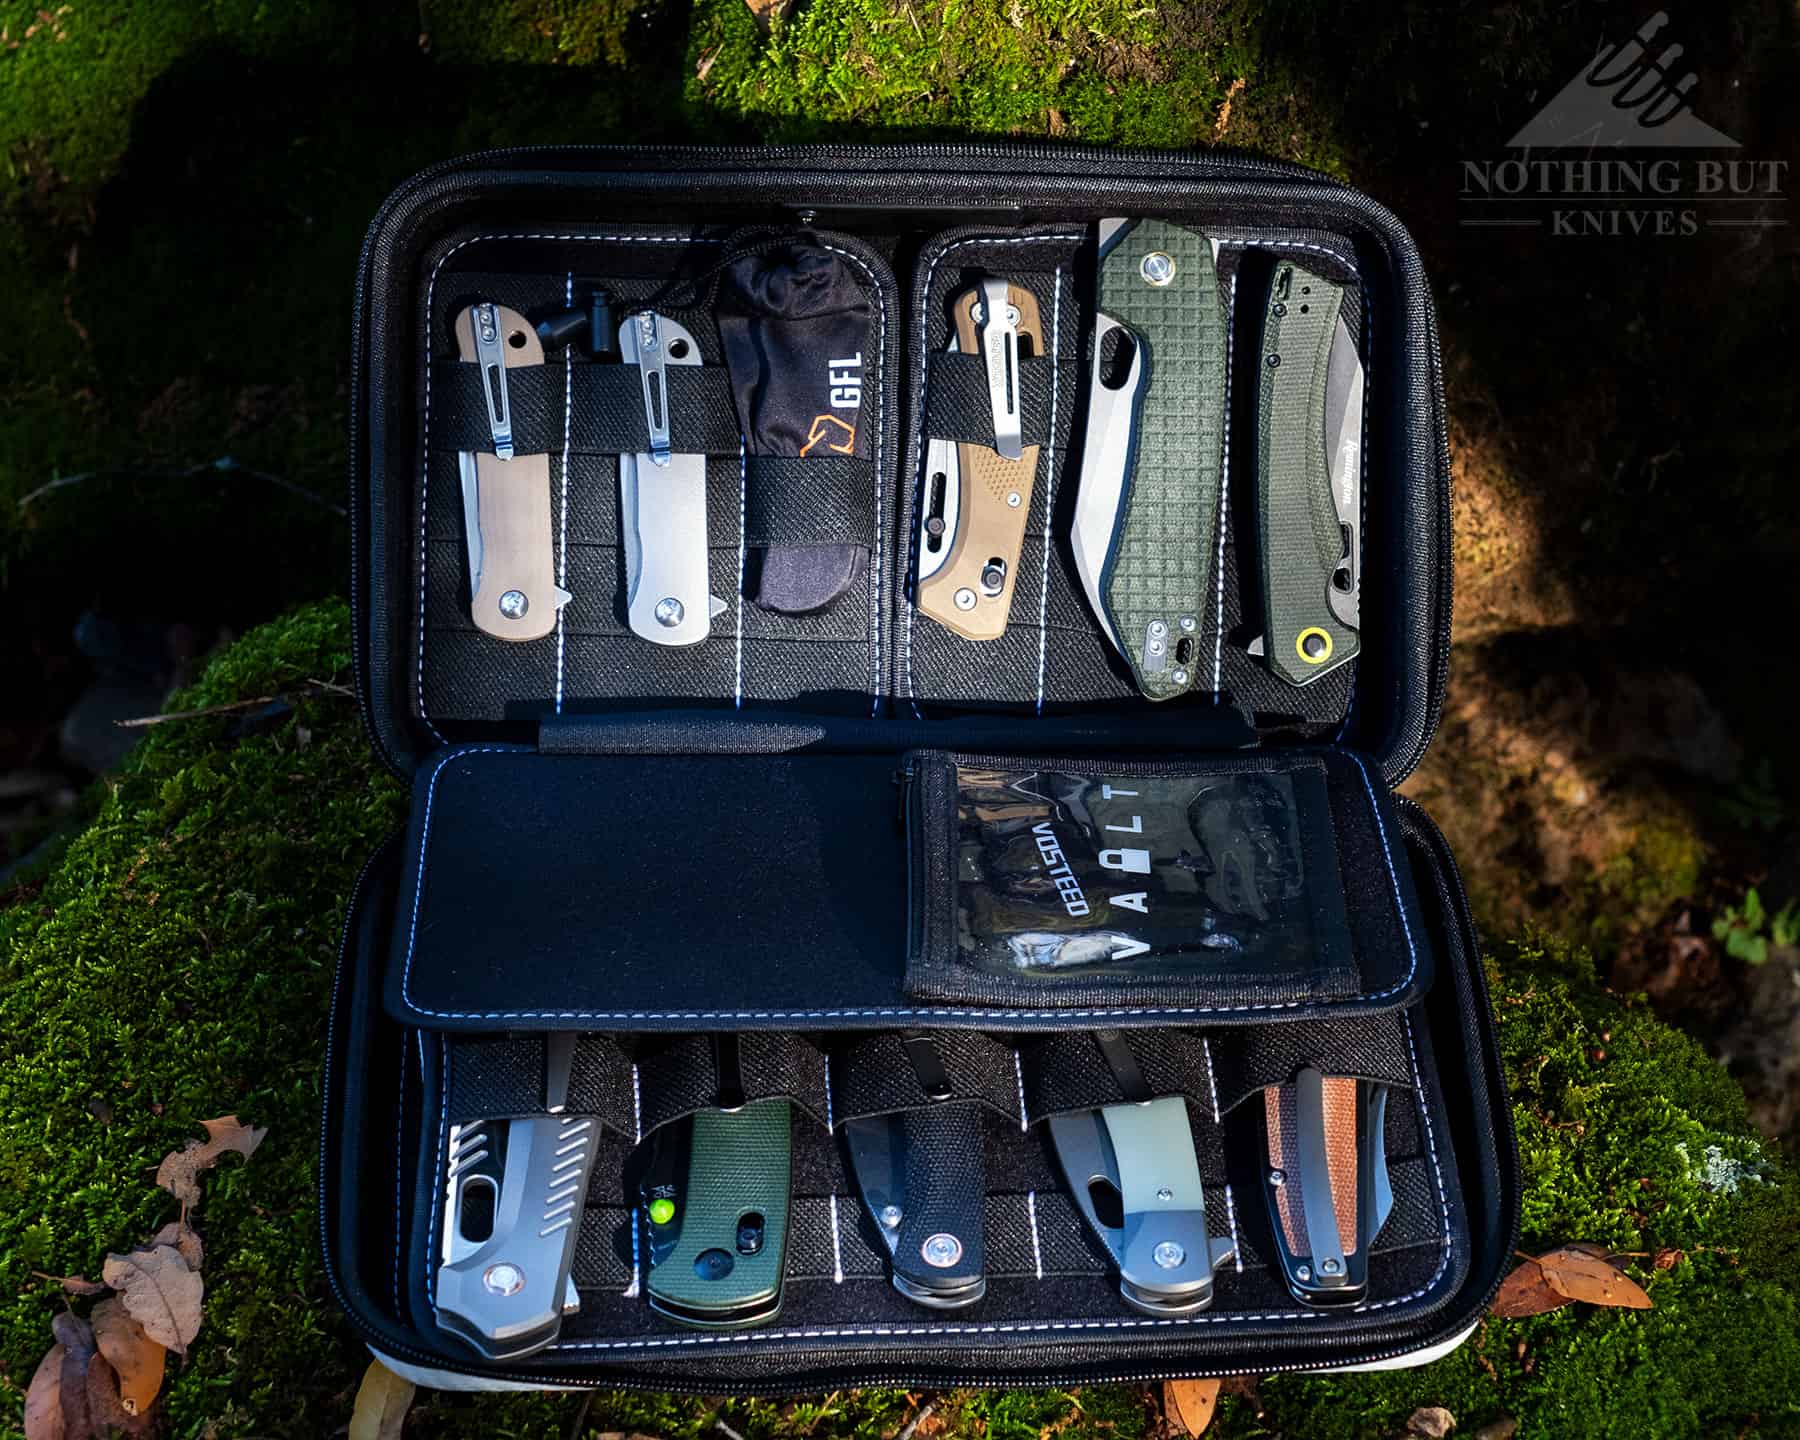 The Vault Secure pocketknife case is a great present for the pocket knife collector on your gift list.